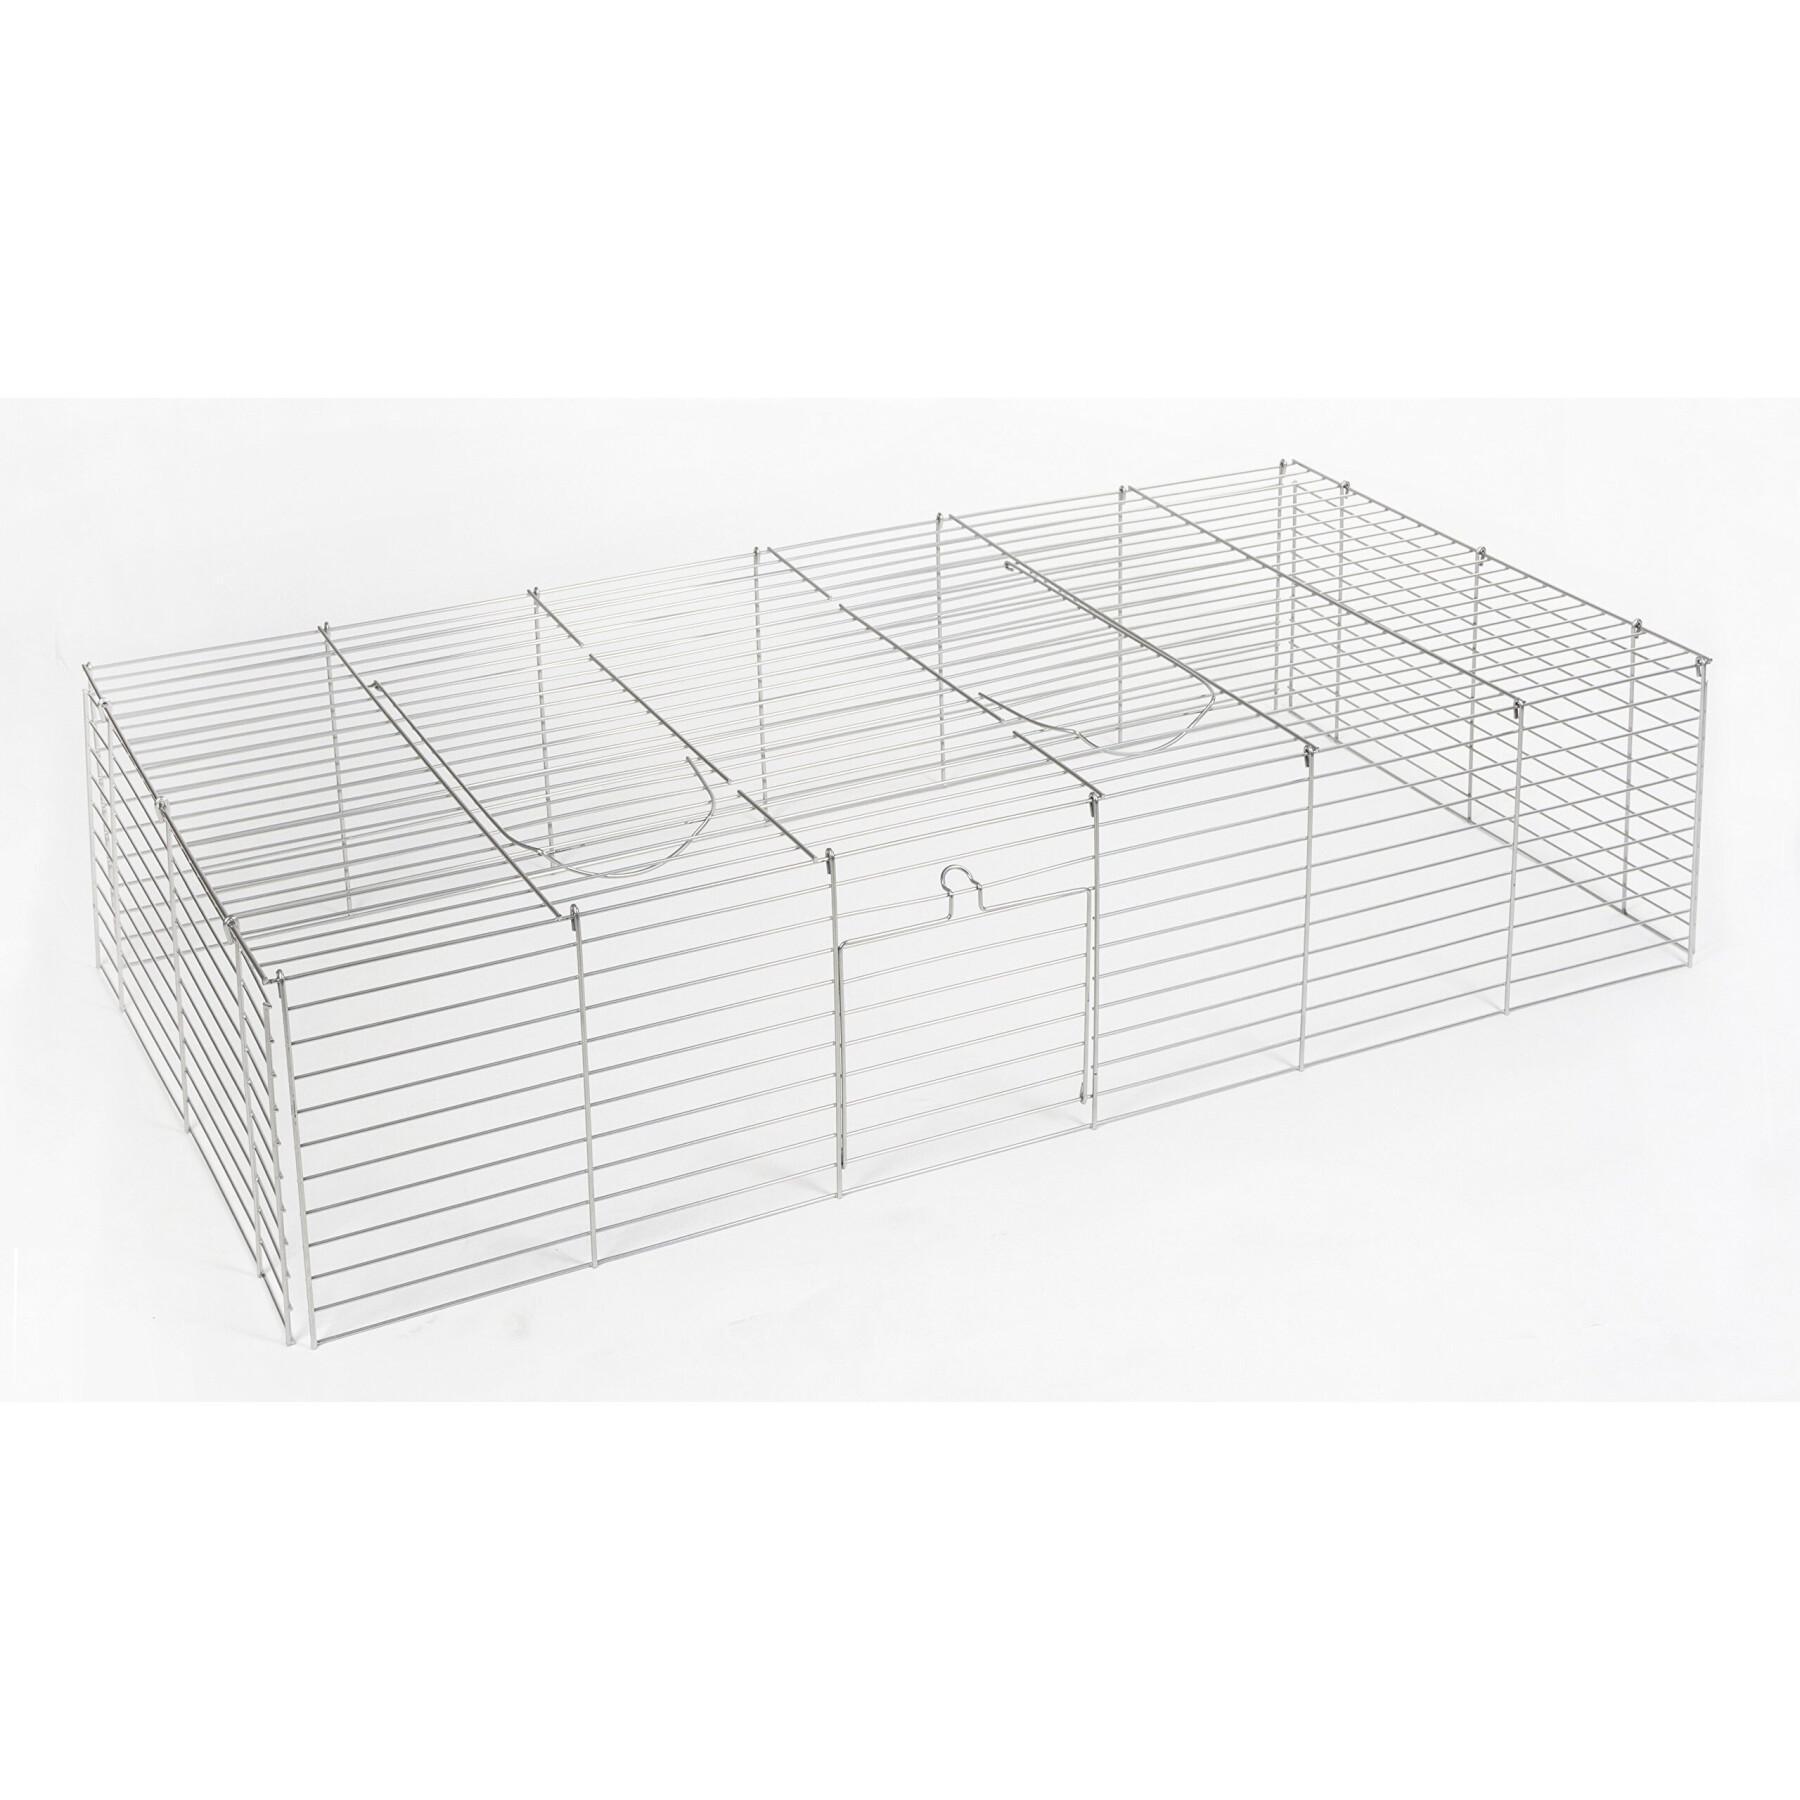 Cage for rodents 2 levels Kerbl Maxi Baldo Twin